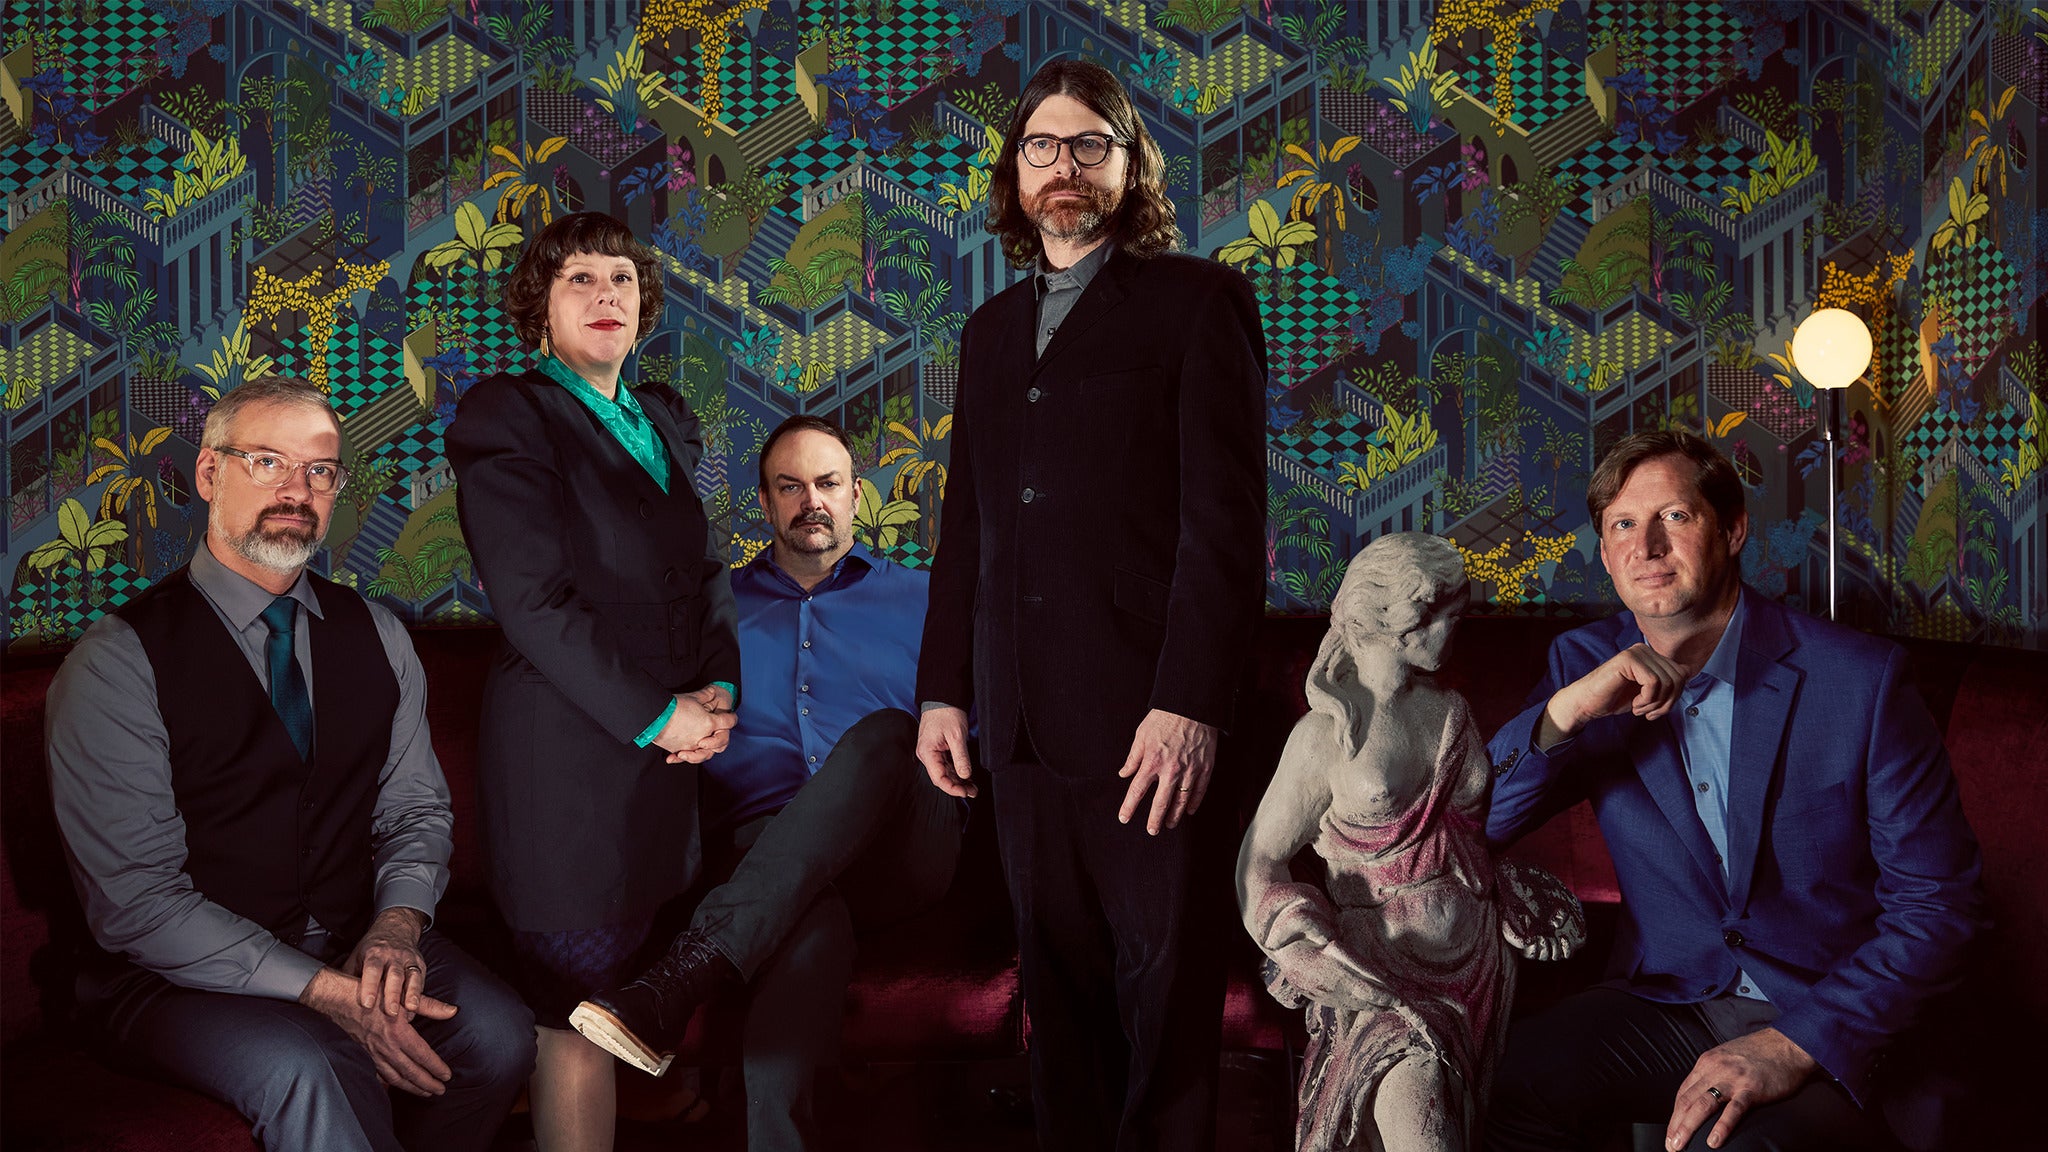 The Decemberists Summer 2022 Tour presale password for event tickets in Atlanta, GA (Tabernacle)